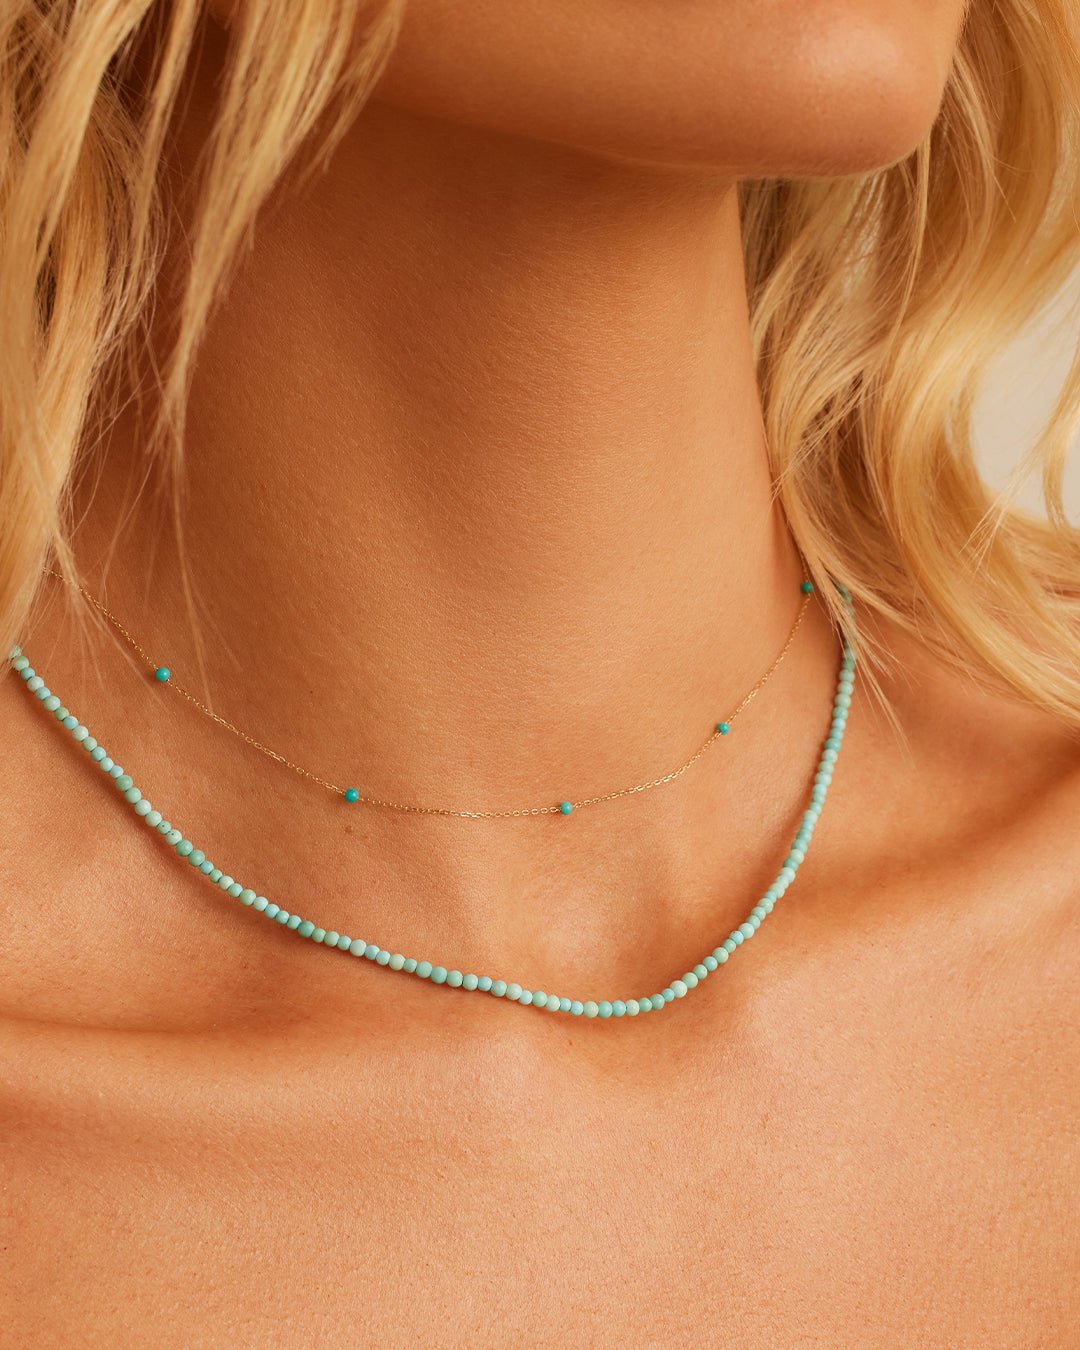 Newport Necklace || option::14k Solid Gold, Turquoise - December